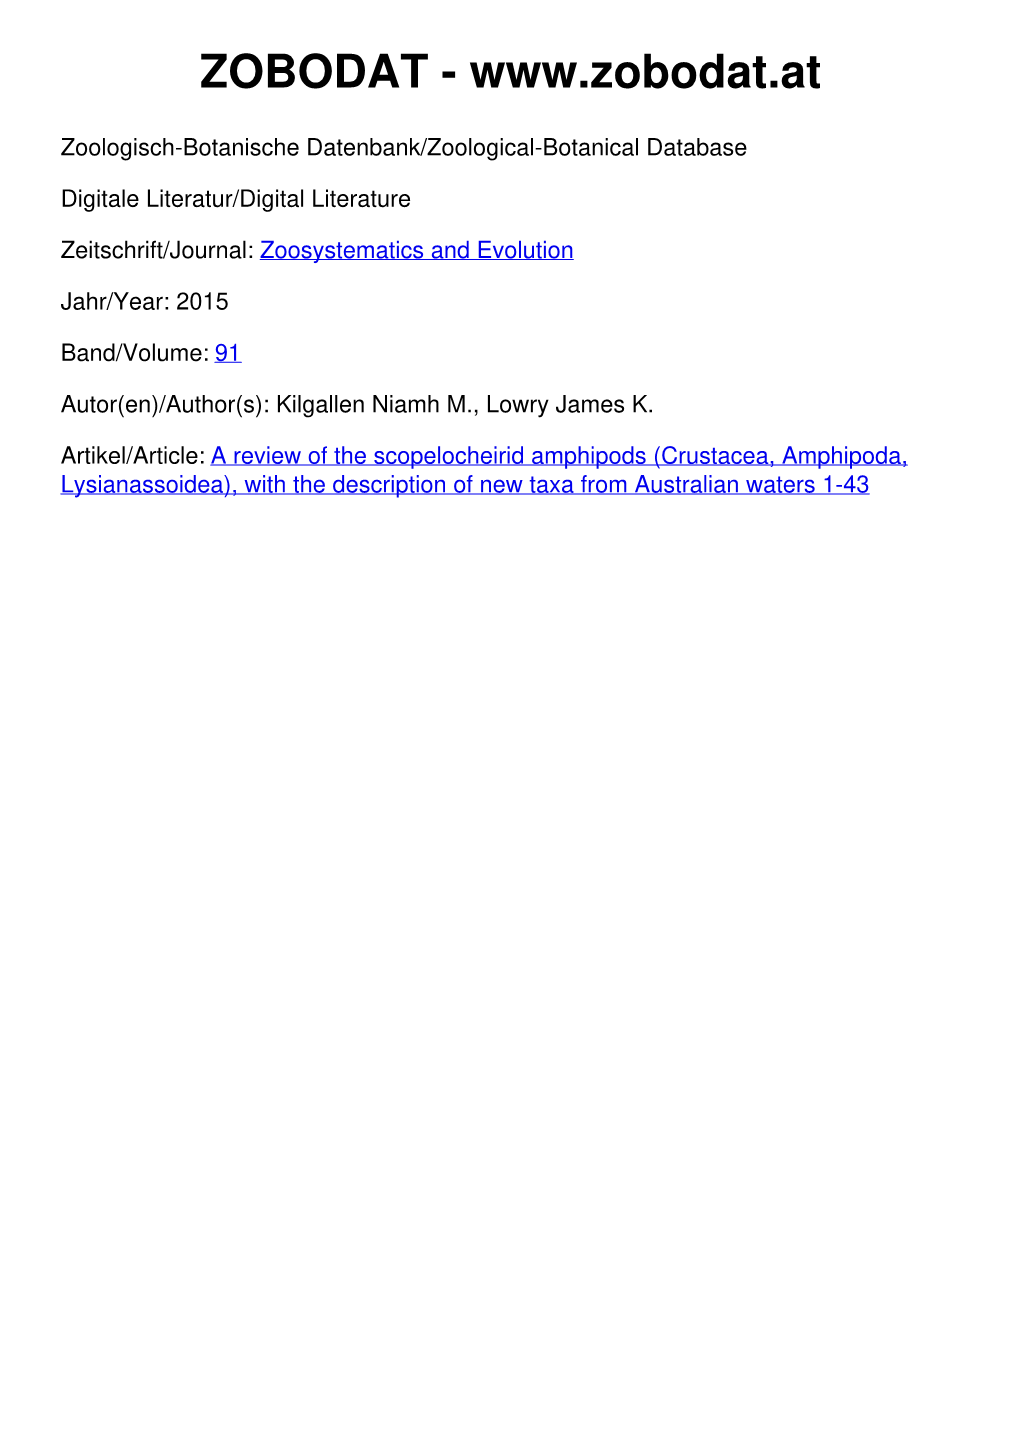 A Review of the Scopelocheirid Amphipods (Crustacea